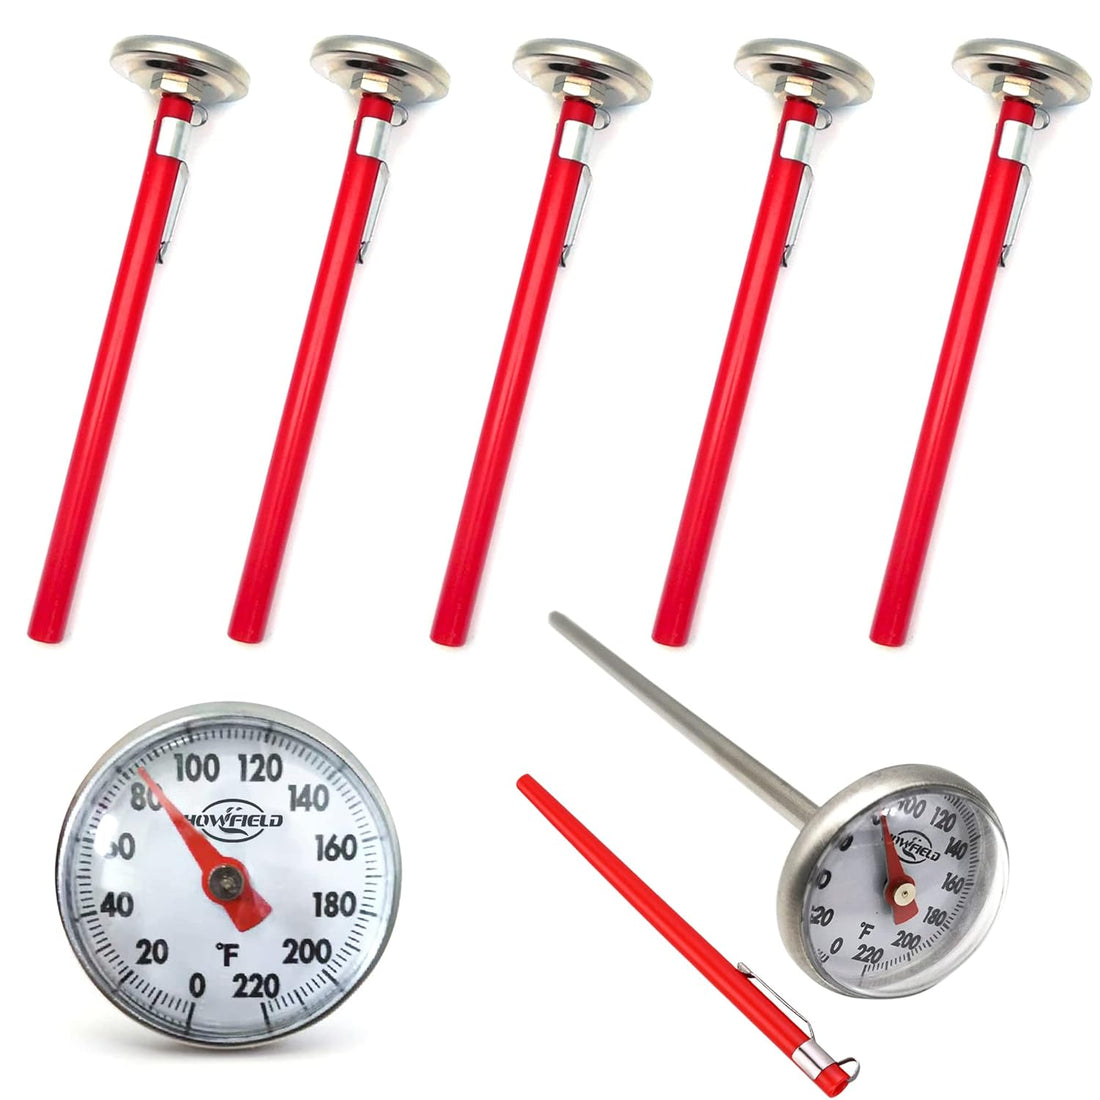 HOWFIELD Kitchen Cooking Thermometer, 304 Stainless Steel Pocket Thermometer, Meat Food Thermometer for Milk Chocolate Field Barbecue, BBQ（5 PCS）